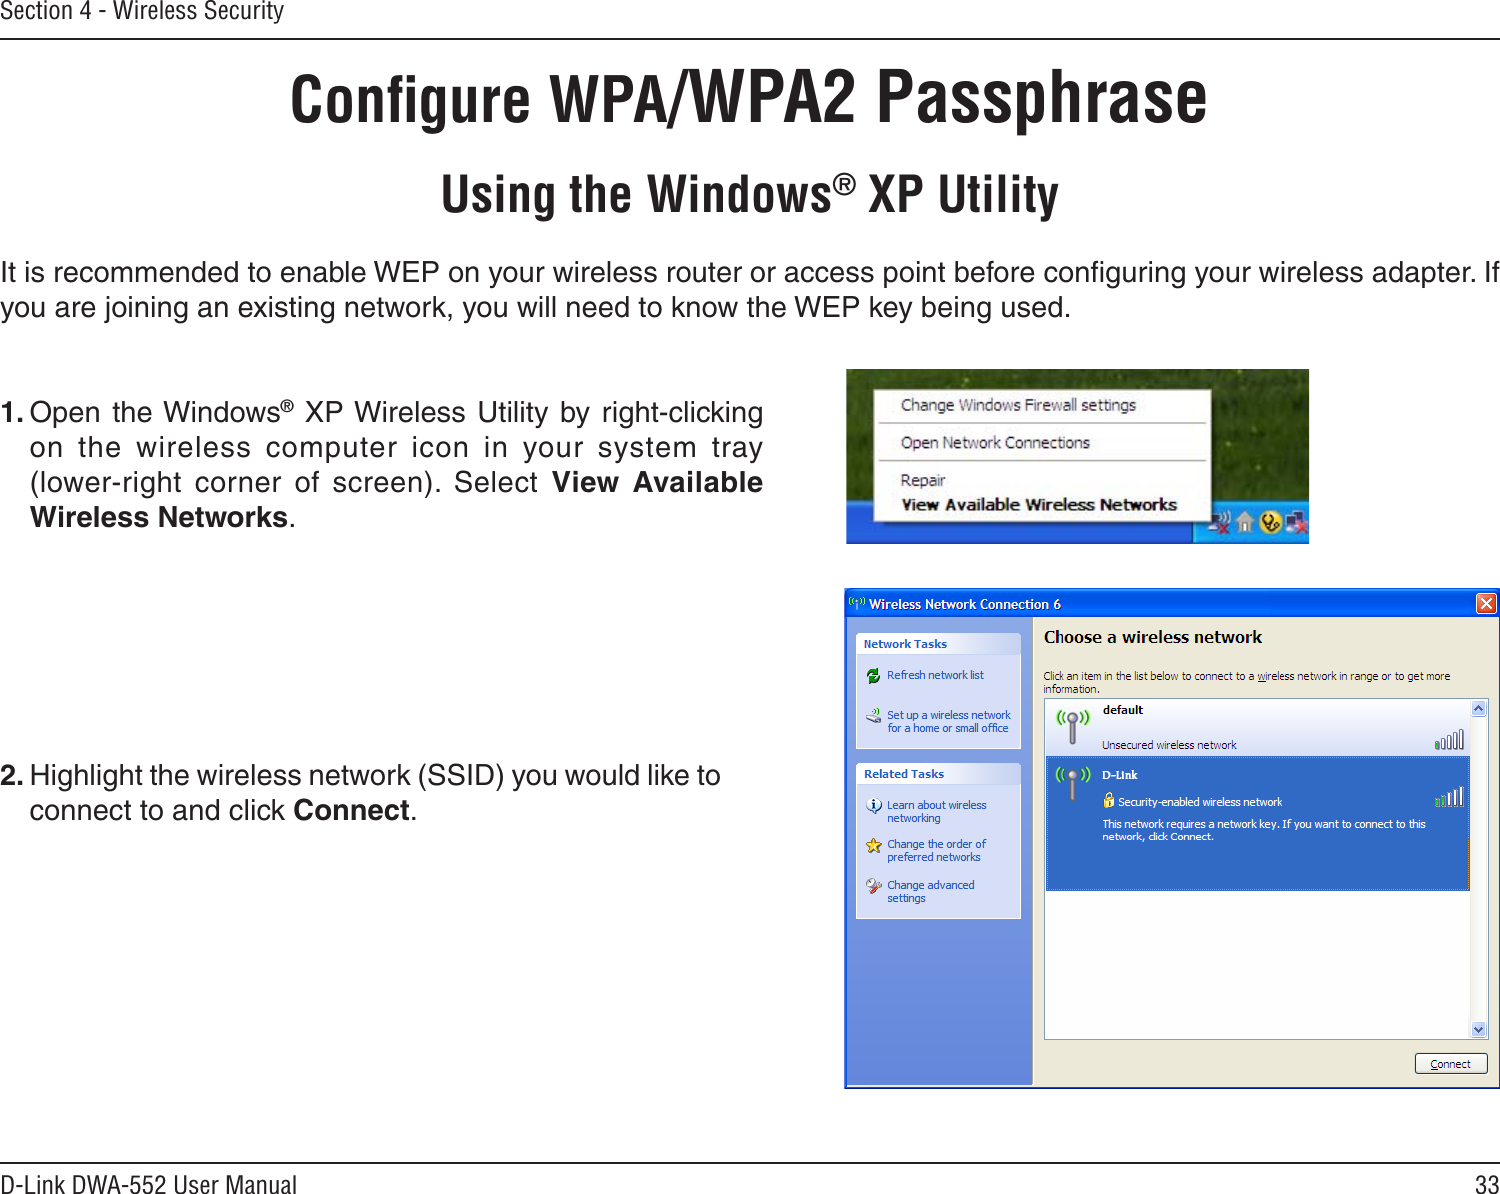 33D-Link DWA-552 User ManualSection 4 - Wireless SecurityConﬁgure WPA/WPA2 PassphraseUsing the Windows® XP UtilityIt is recommended to enable WEP on your wireless router or access point before conﬁguring your wireless adapter. If you are joining an existing network, you will need to know the WEP key being used.2. Highlight the wireless network (SSID) you would like to connect to and click Connect.1. Open the Windows® XP Wireless  Utility  by right-clicking on  the  wireless  computer  icon  in  your  system  tray  (lower-right  corner  of  screen).  Select  View  Available Wireless Networks. 